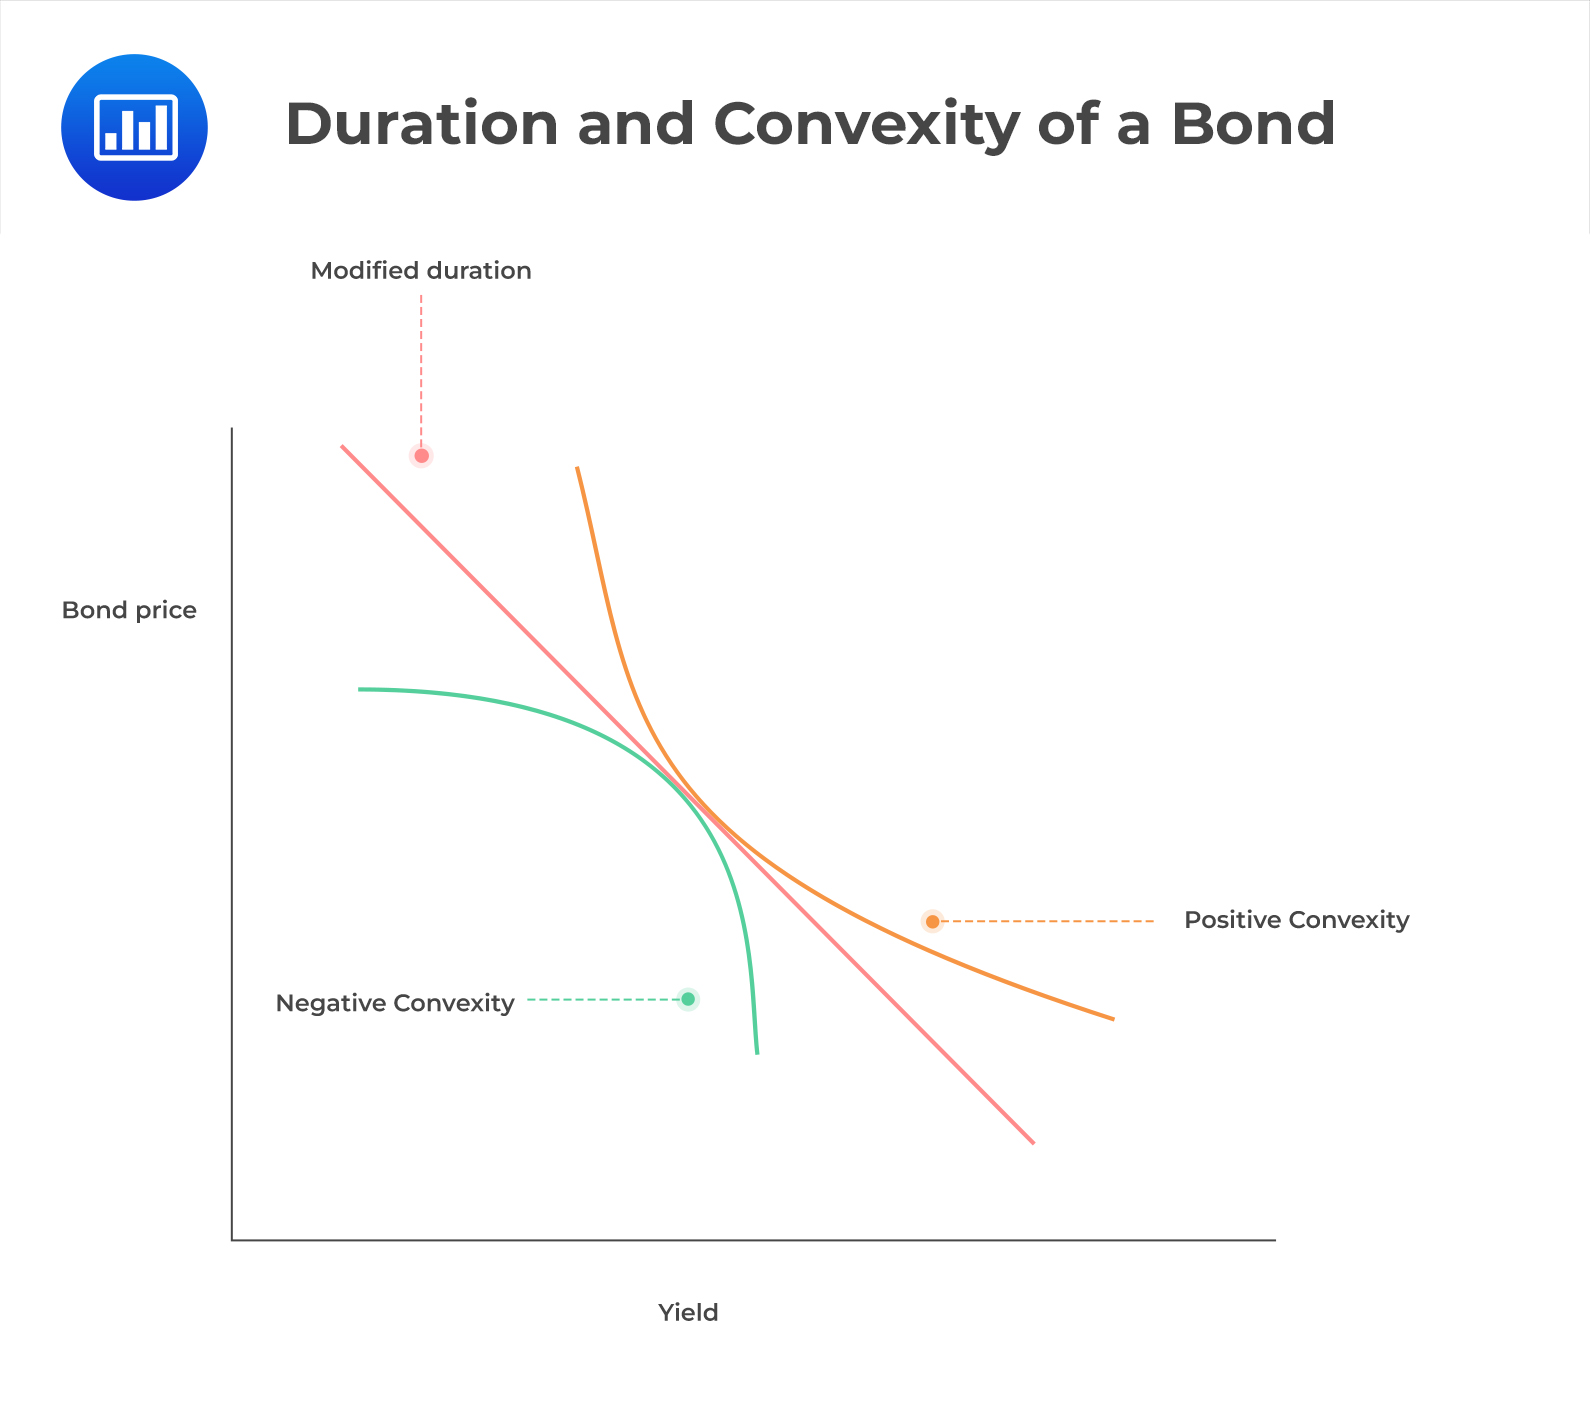 Duration and Convexity of a Bond